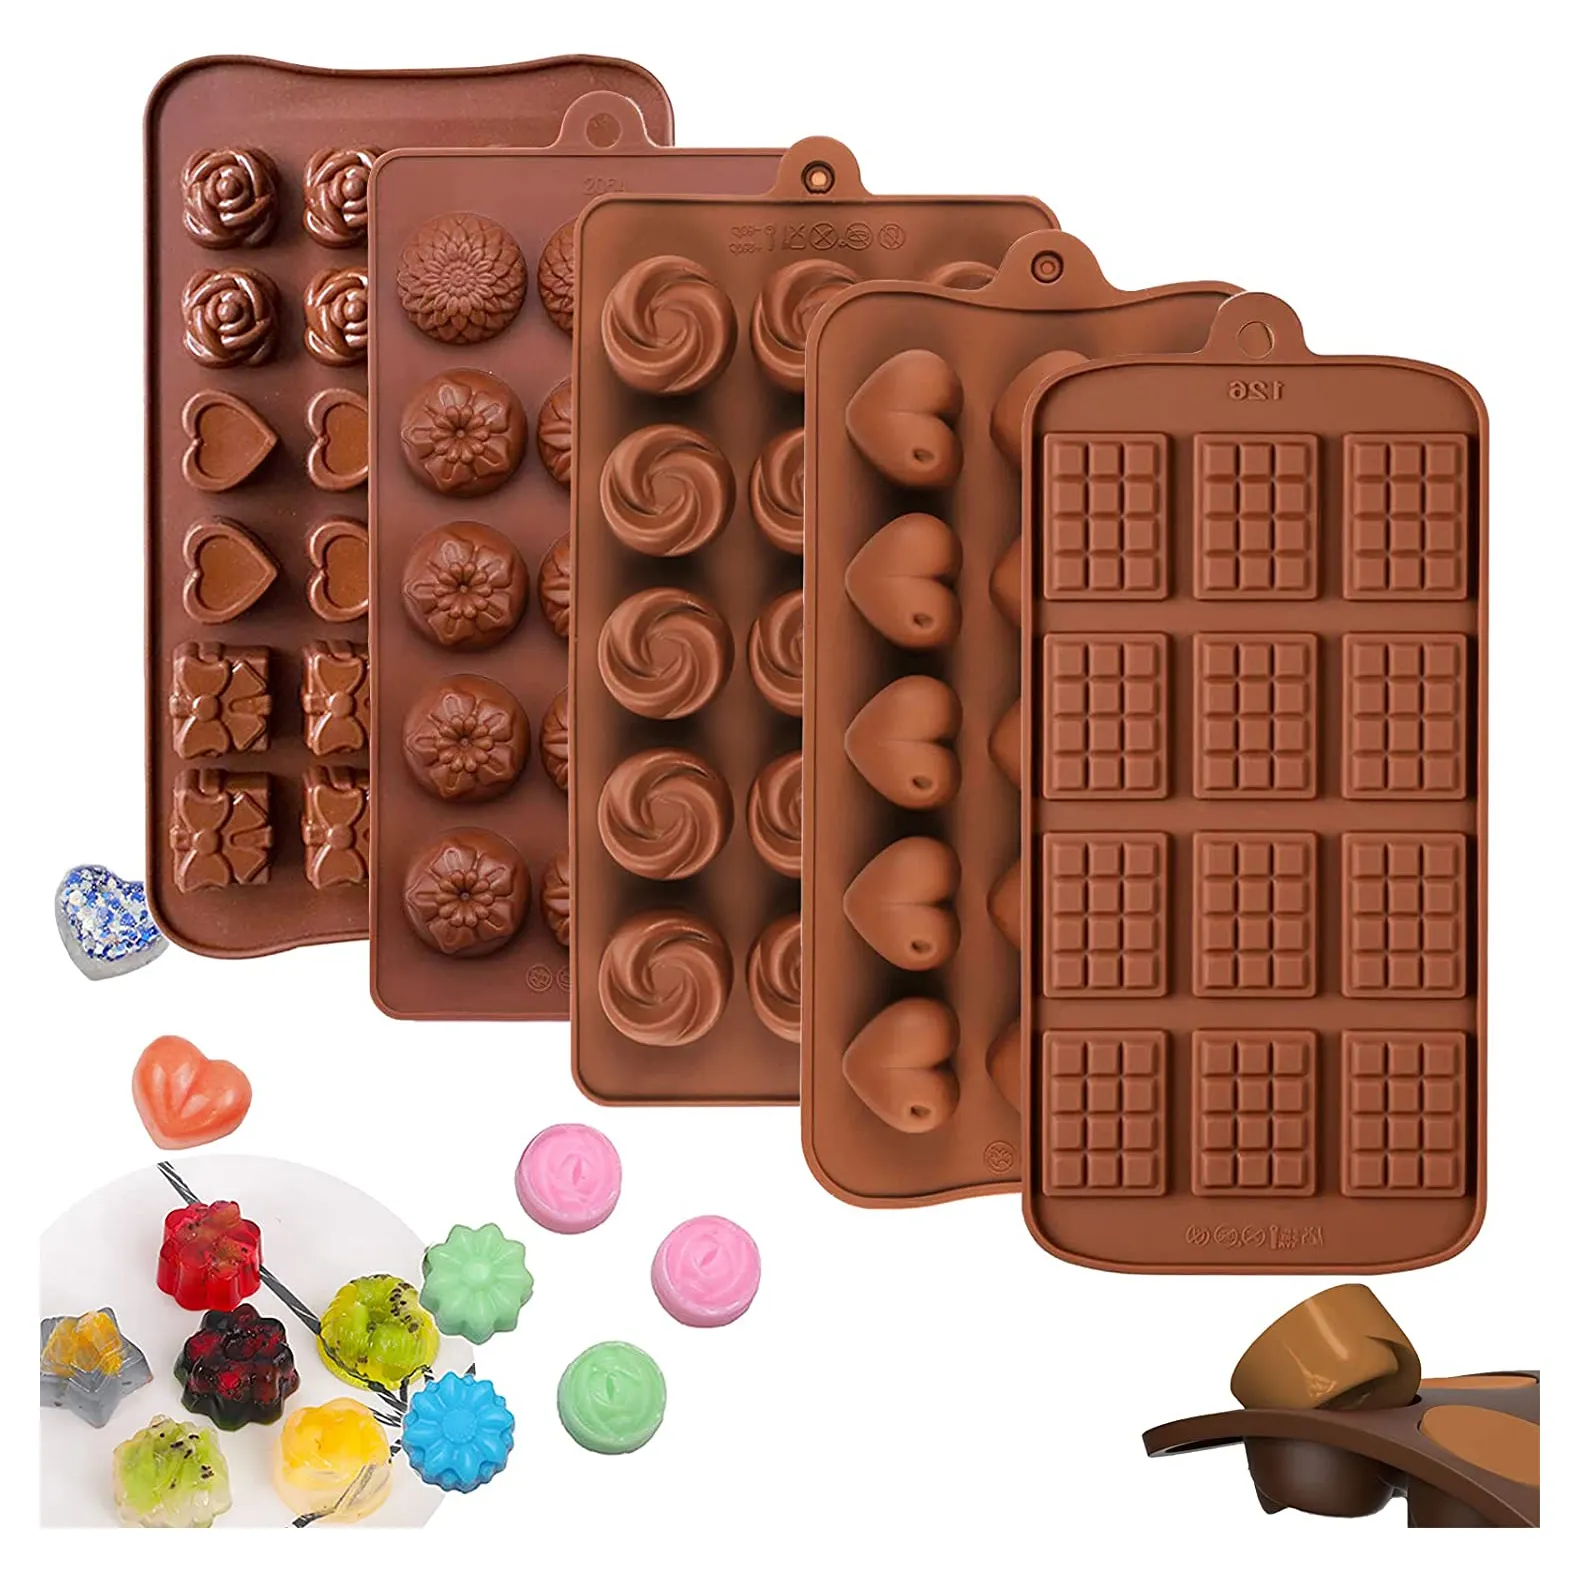 Wholesale Bpa free food grade silicone Christmas Chocolate Candy Moulds heat resisting DIY Cake Baking Molds